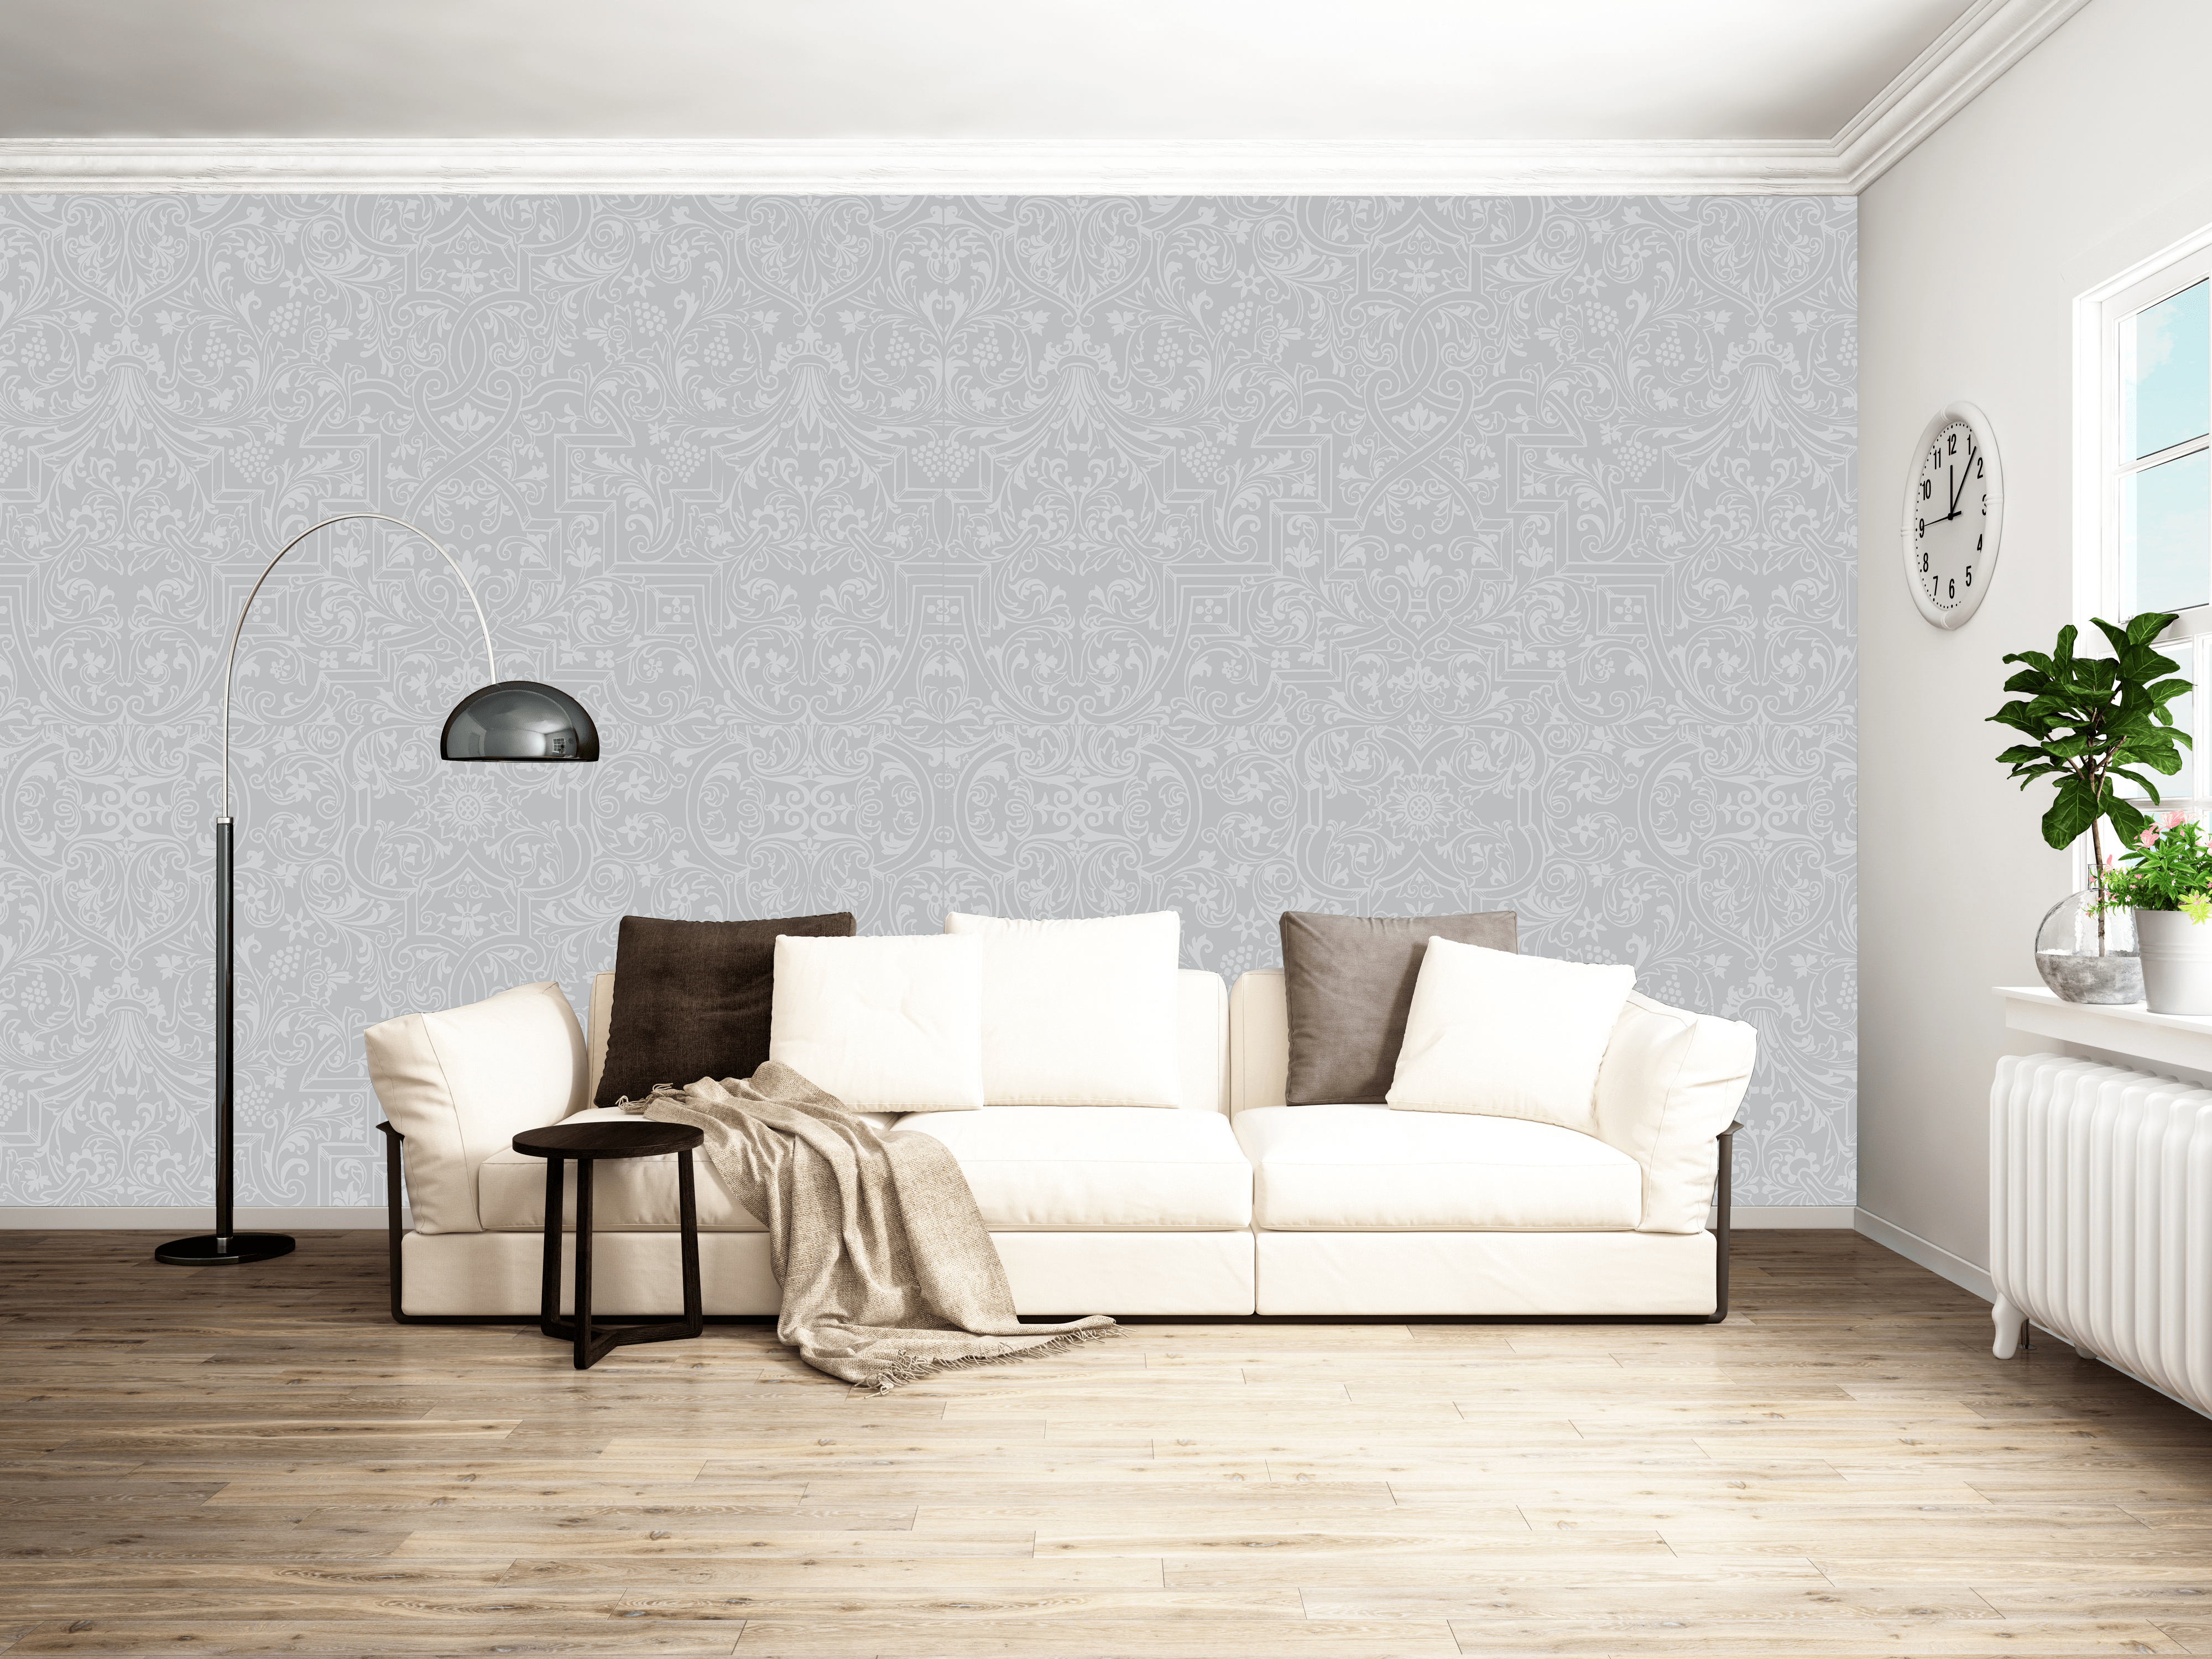 Living room wallpaper ideas transform your space – try these looks